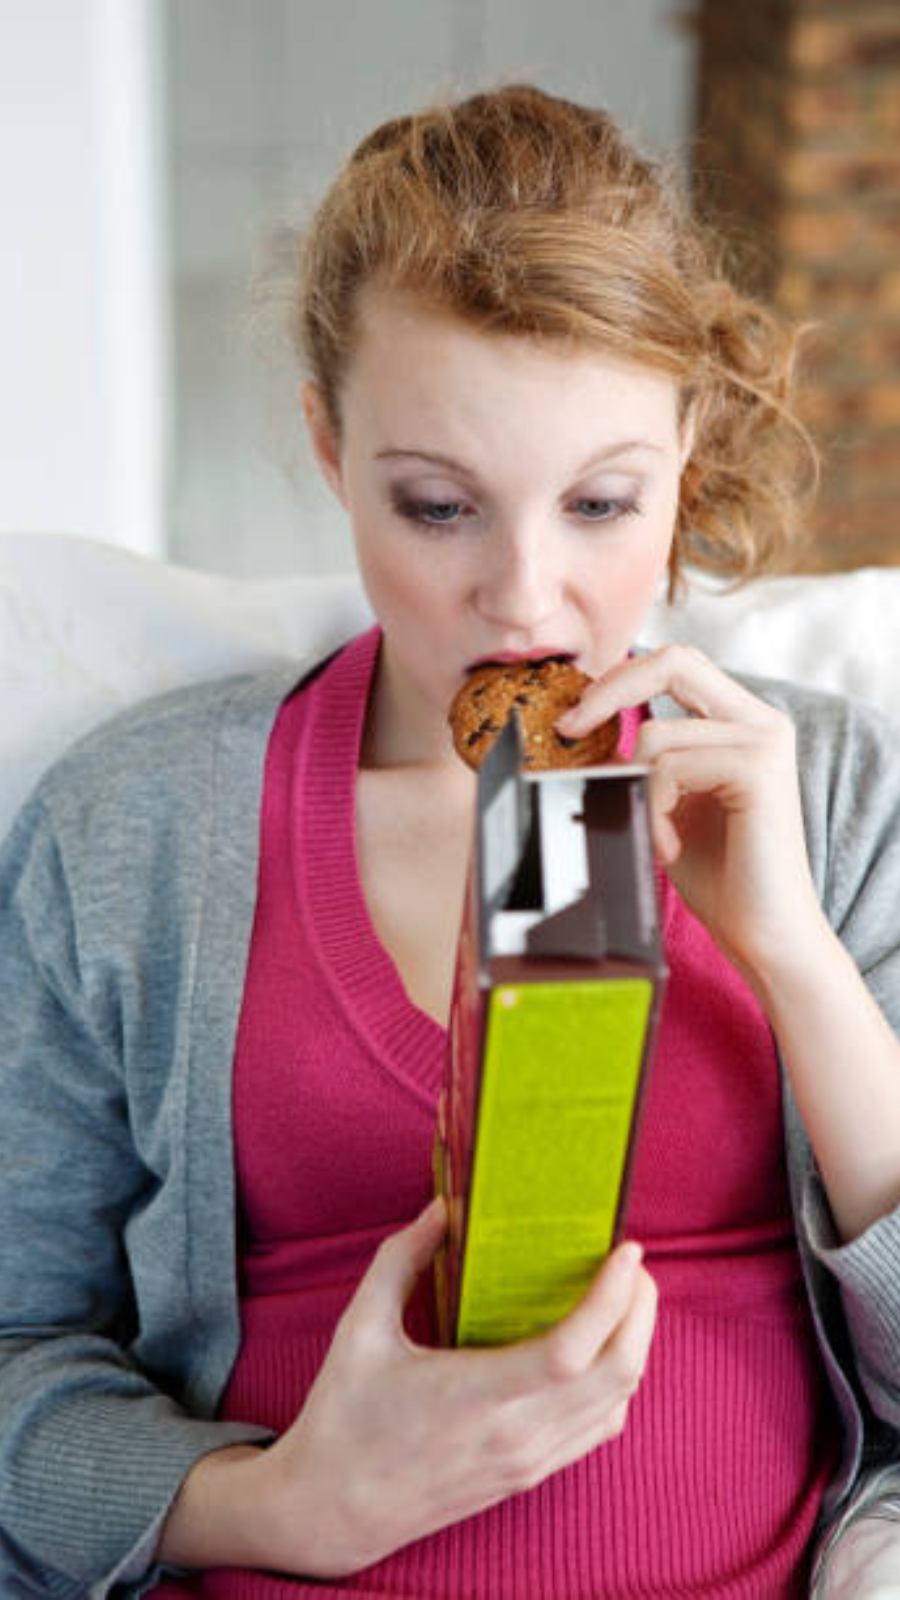 Tips to control craving for processed foods